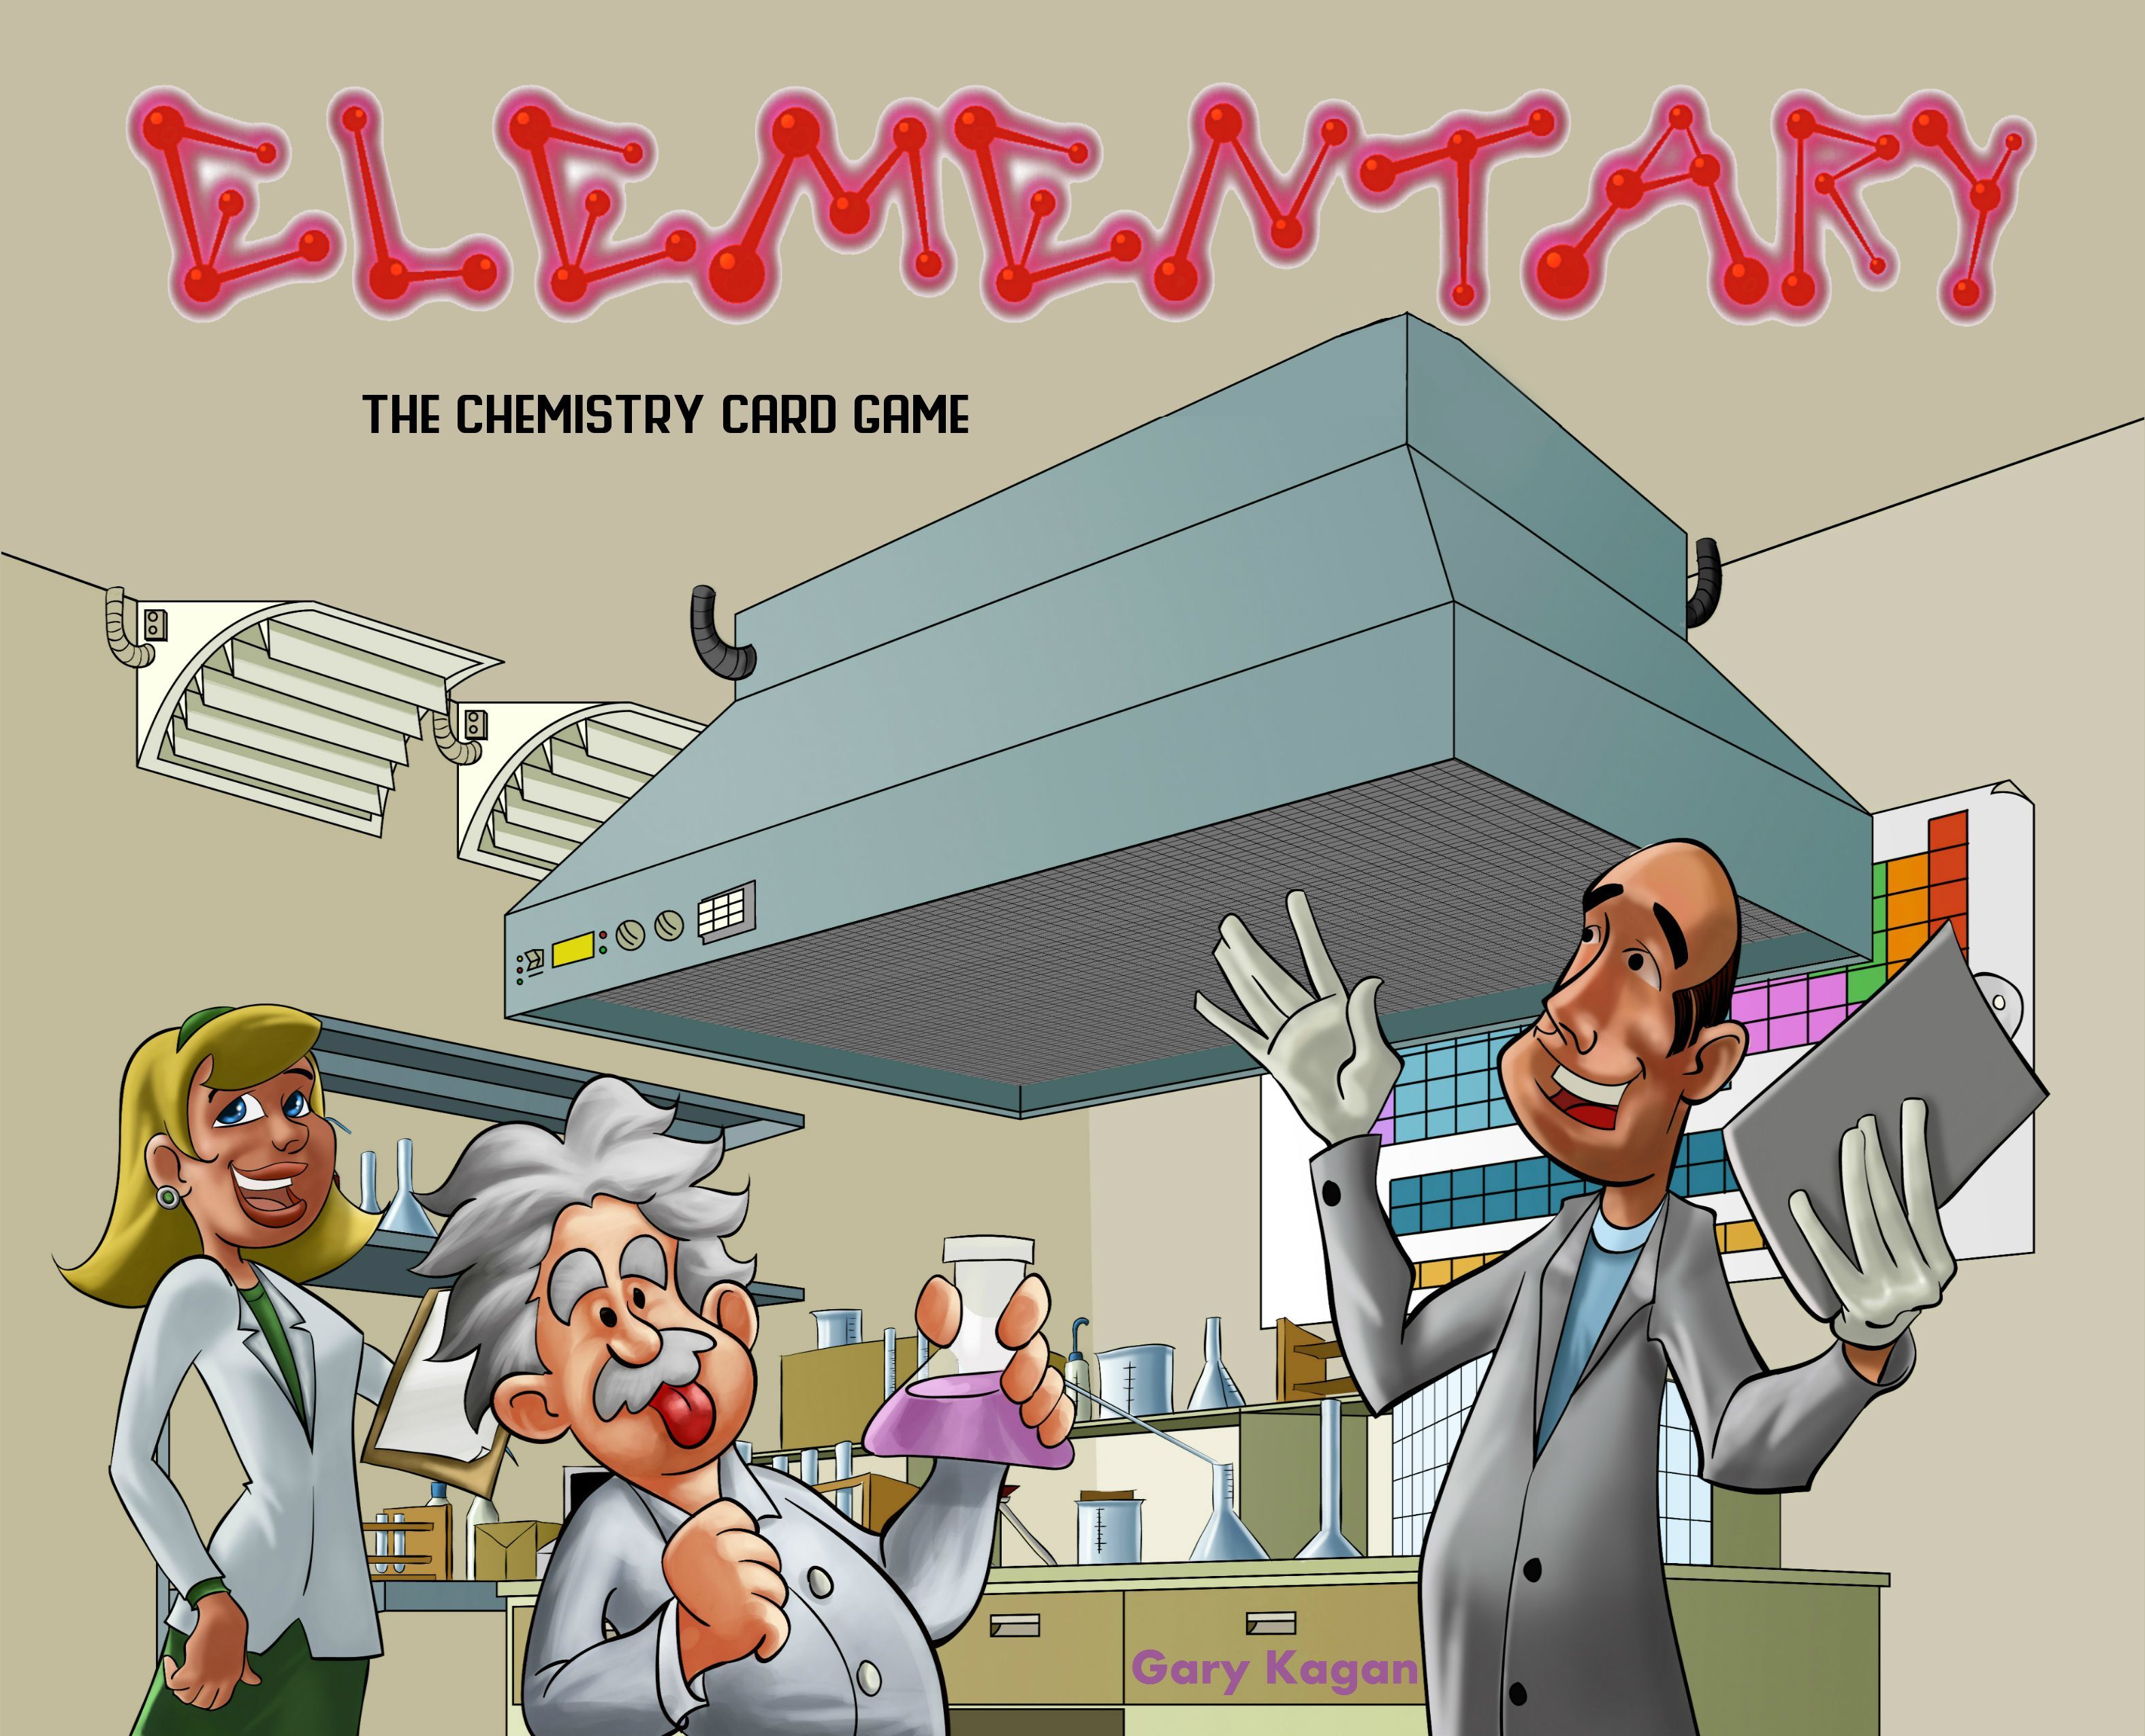 Elementary: The Chemistry Card Game